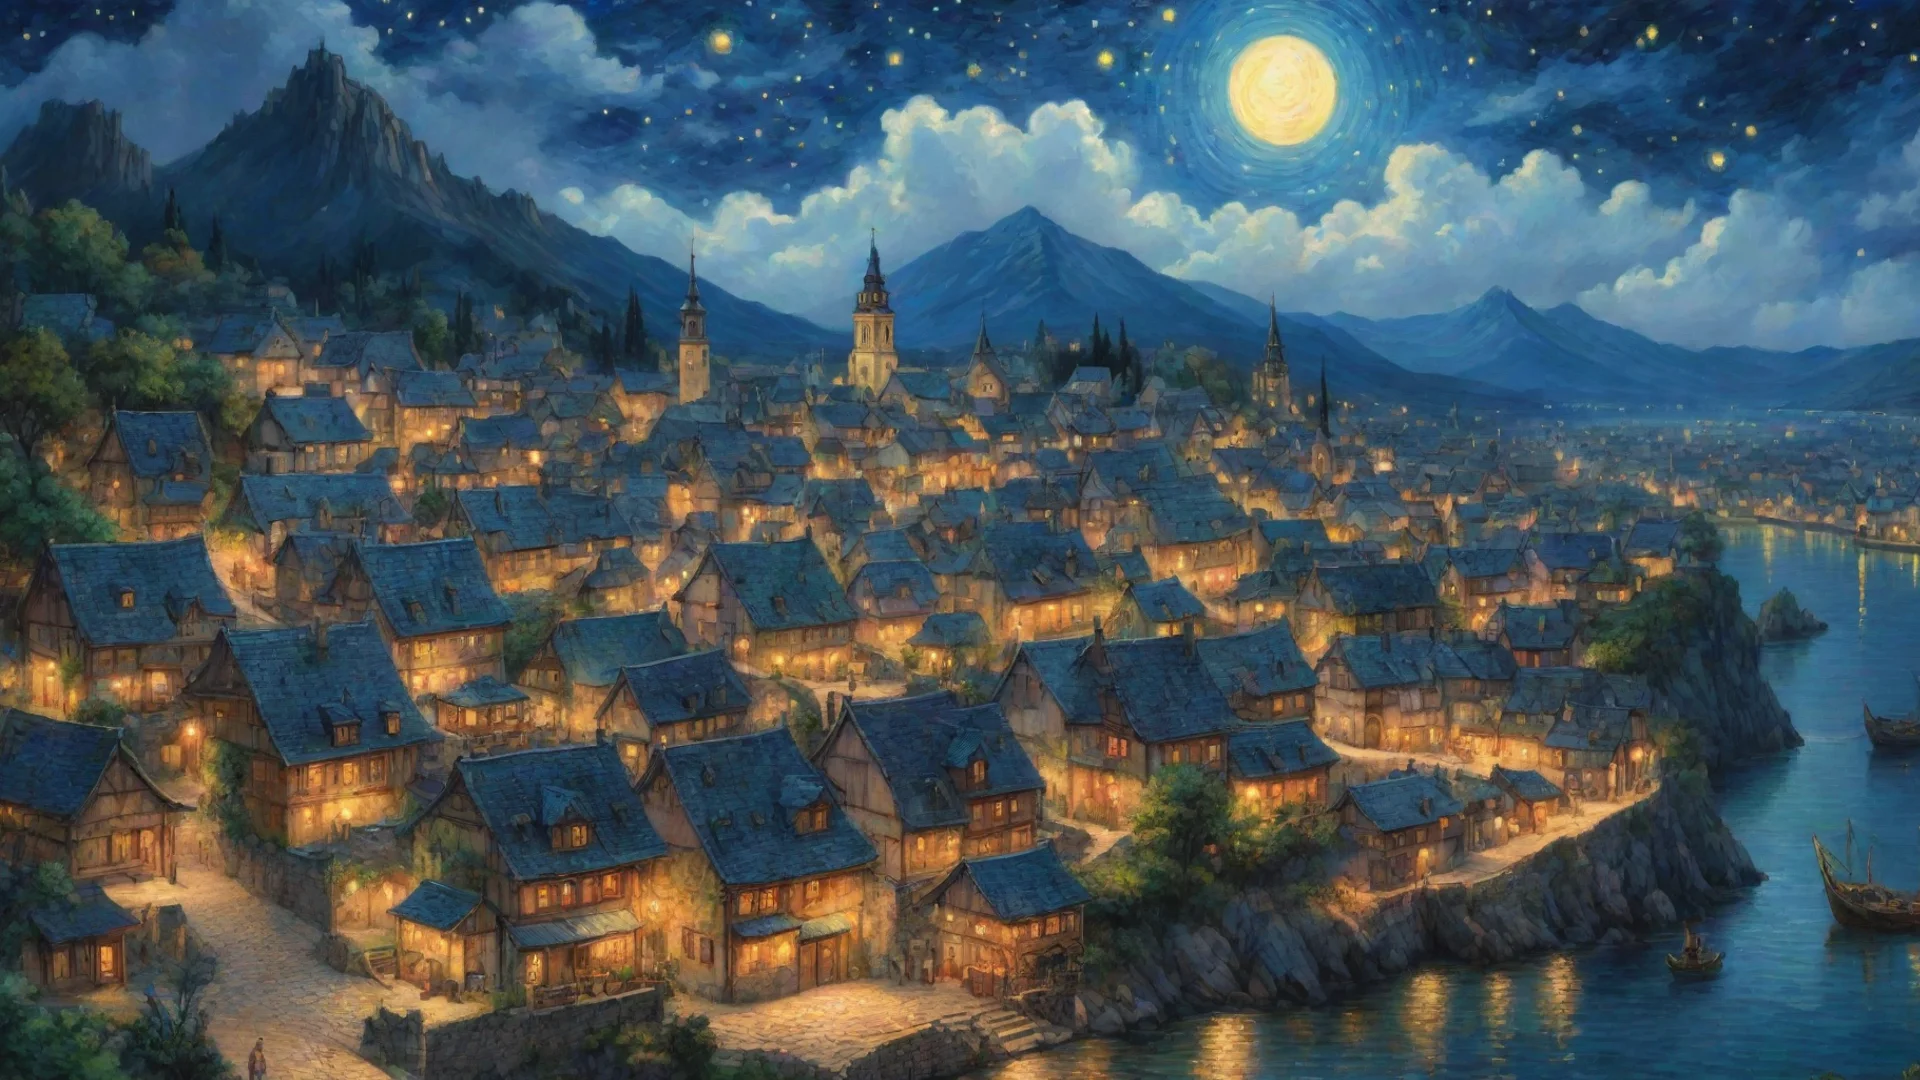 artstation art heavenly epic town lit up at night sky epic lovely artistic ghibli van gogh happyness bliss peace  detailed asthetic hd wow confident engaging wow 3 wide